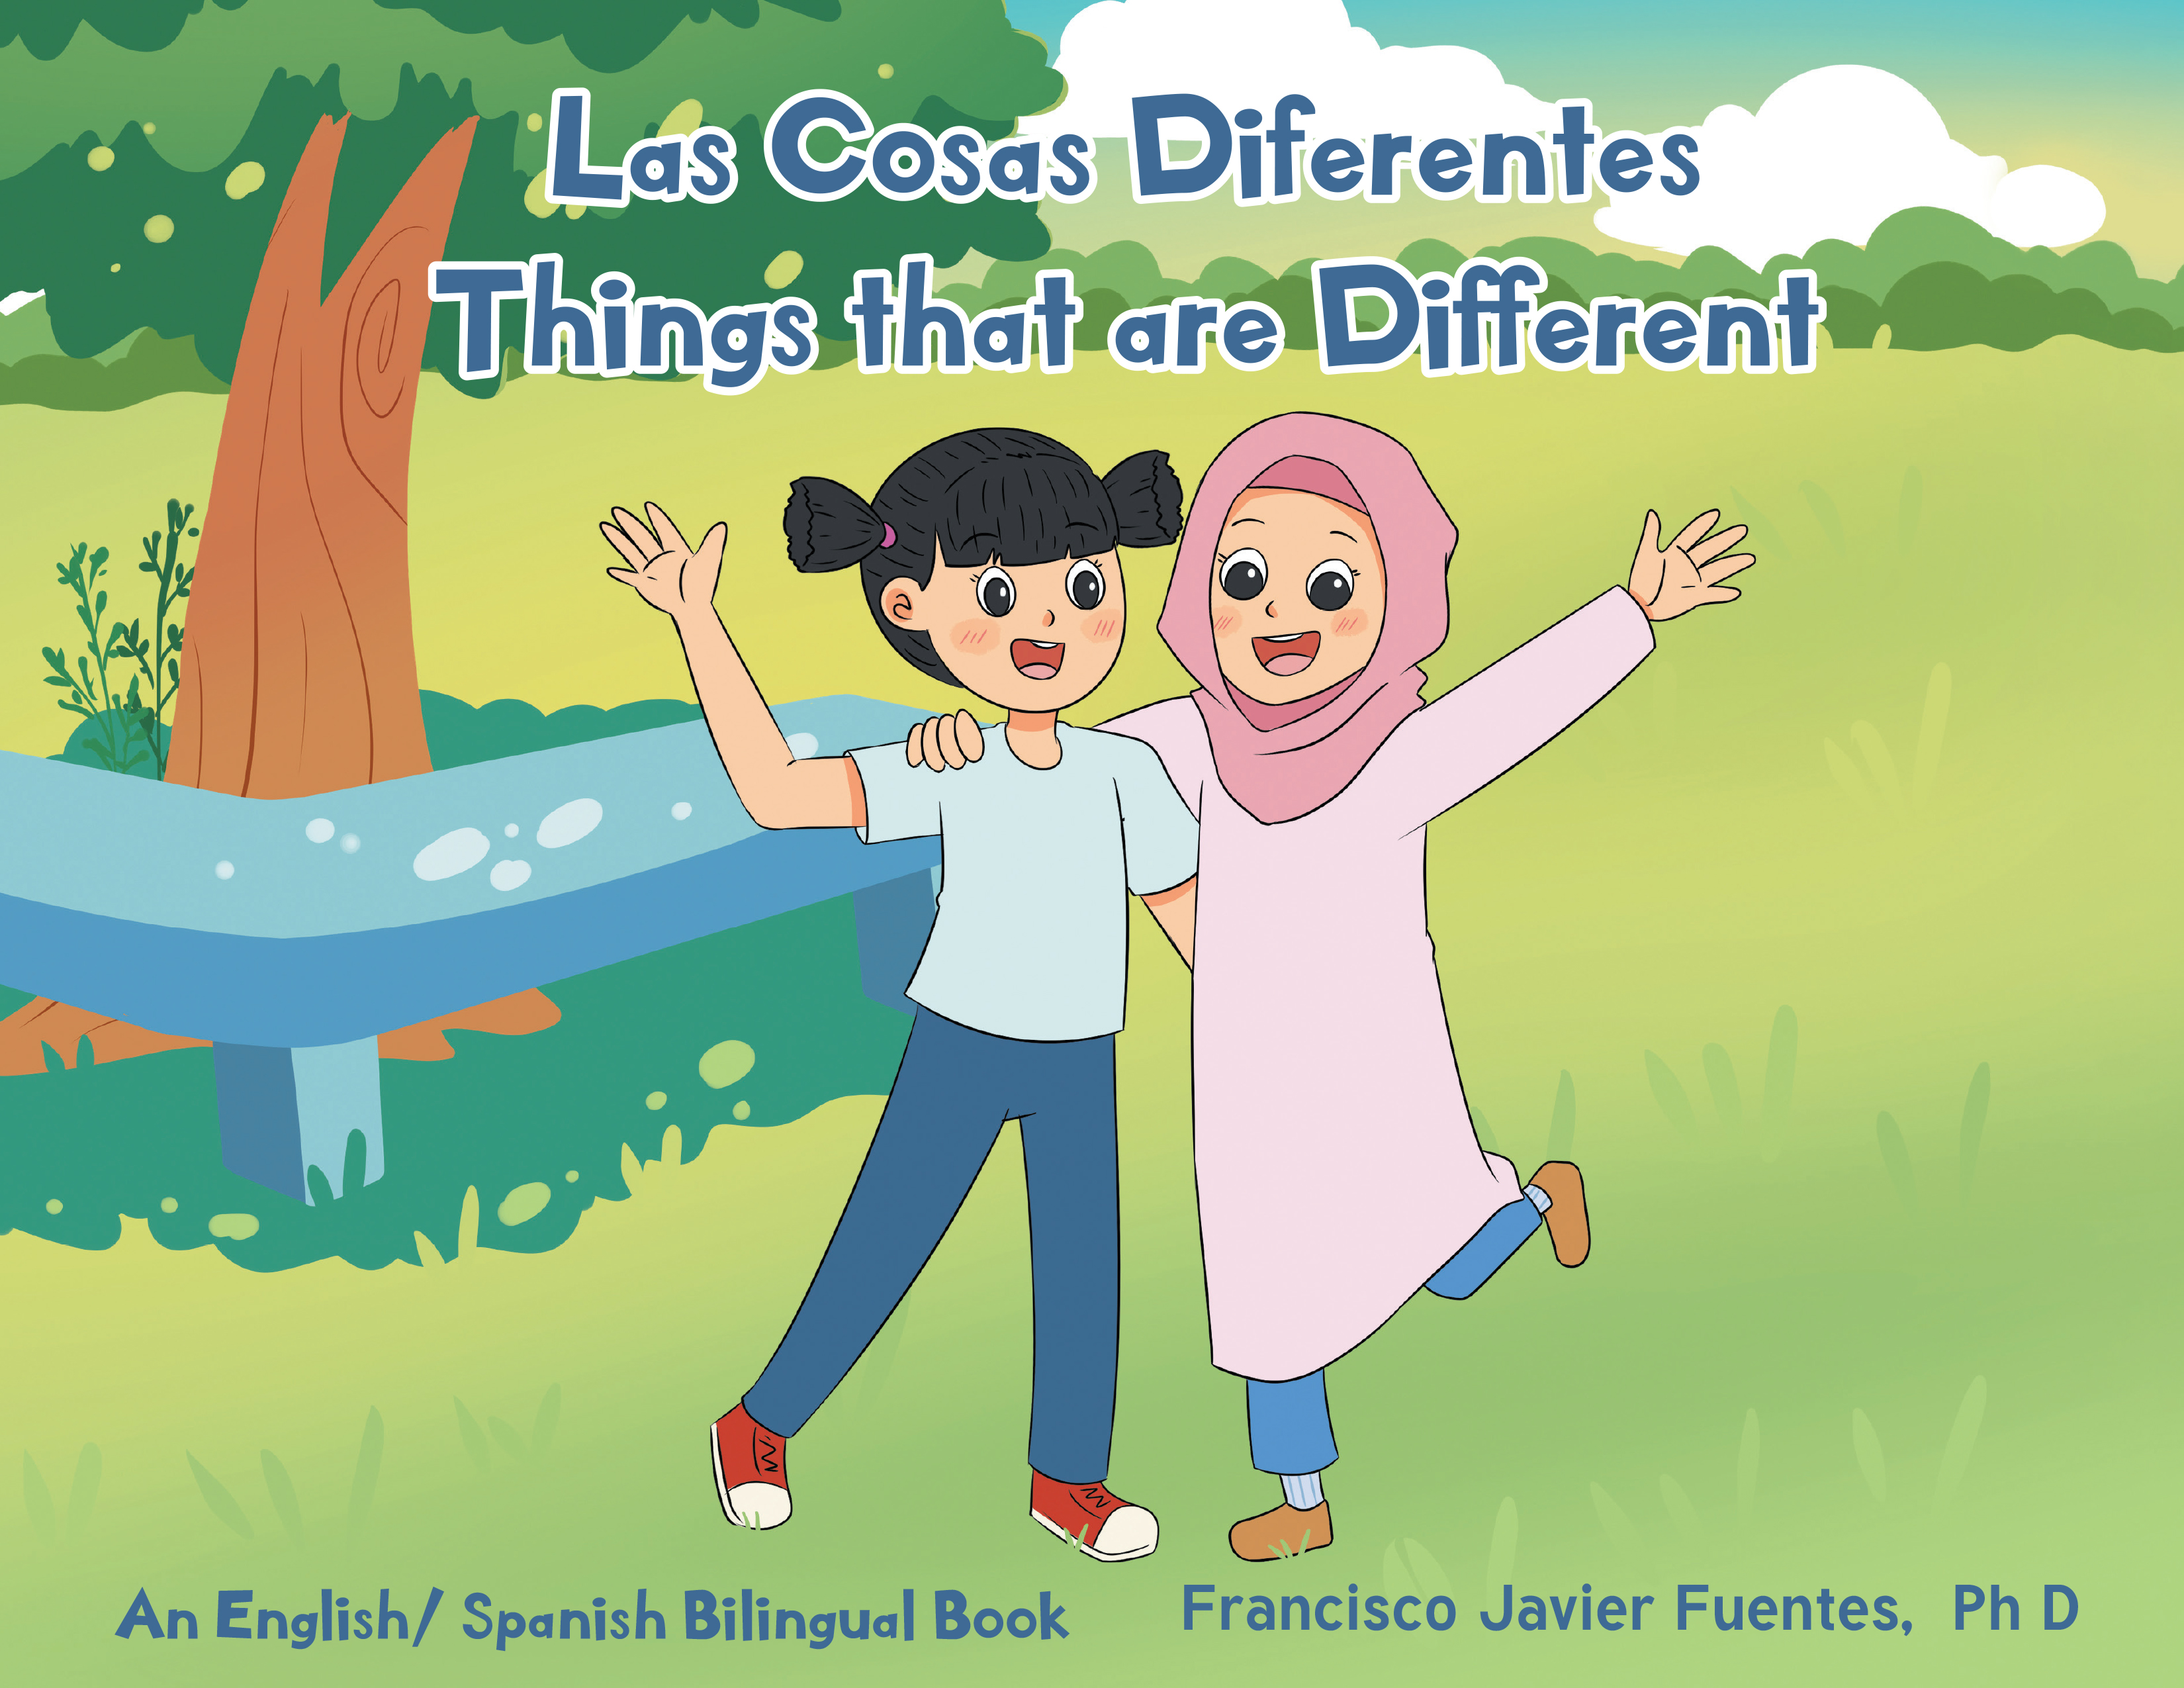 Francisco Javier Fuentes, Ph D’s New Book, “Las Cosas Diferente: Things that are Different,” Explores How Being Different Doesn't Make Someone Better or Worse Than Others